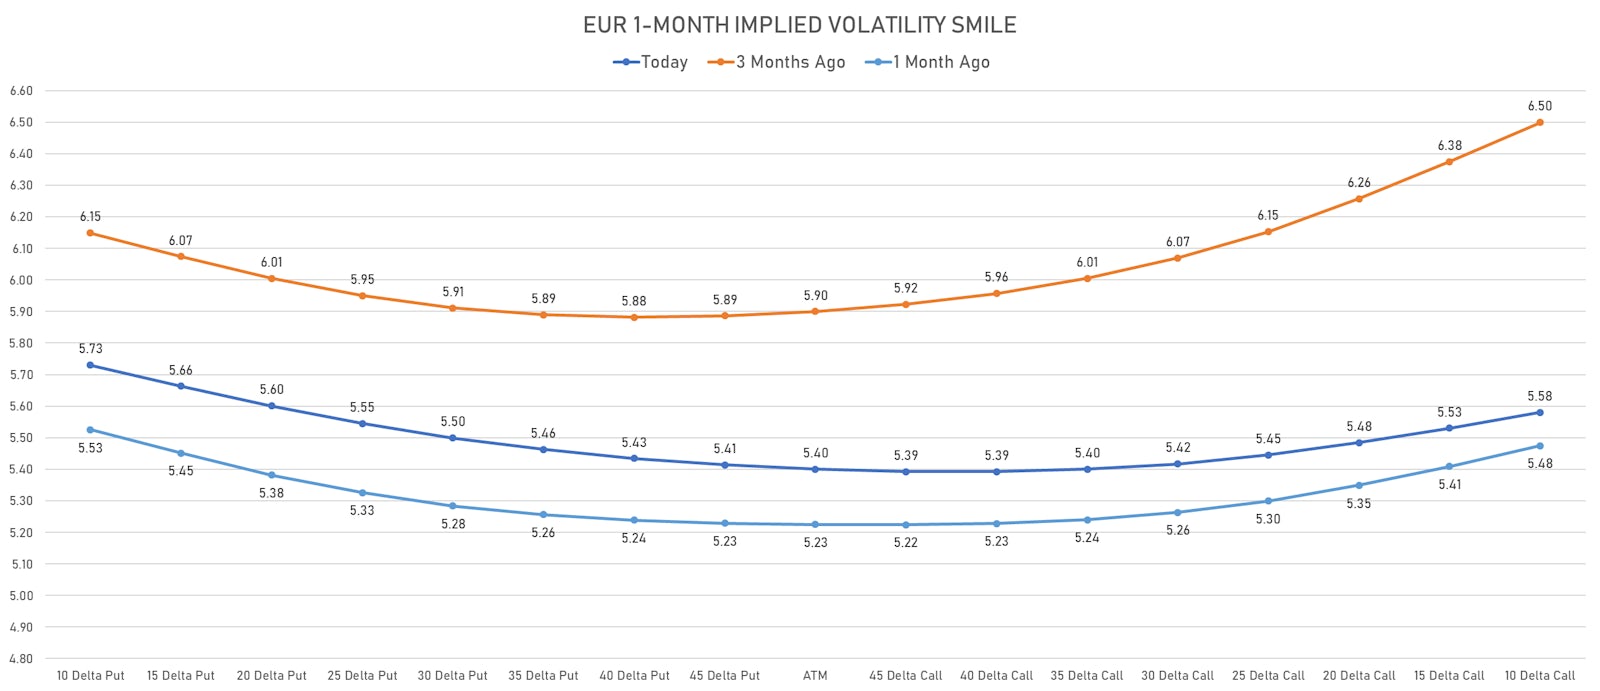 Euro 1-month options prices are still slightly skewed to the downside | Sources: ϕpost, Refinitiv data